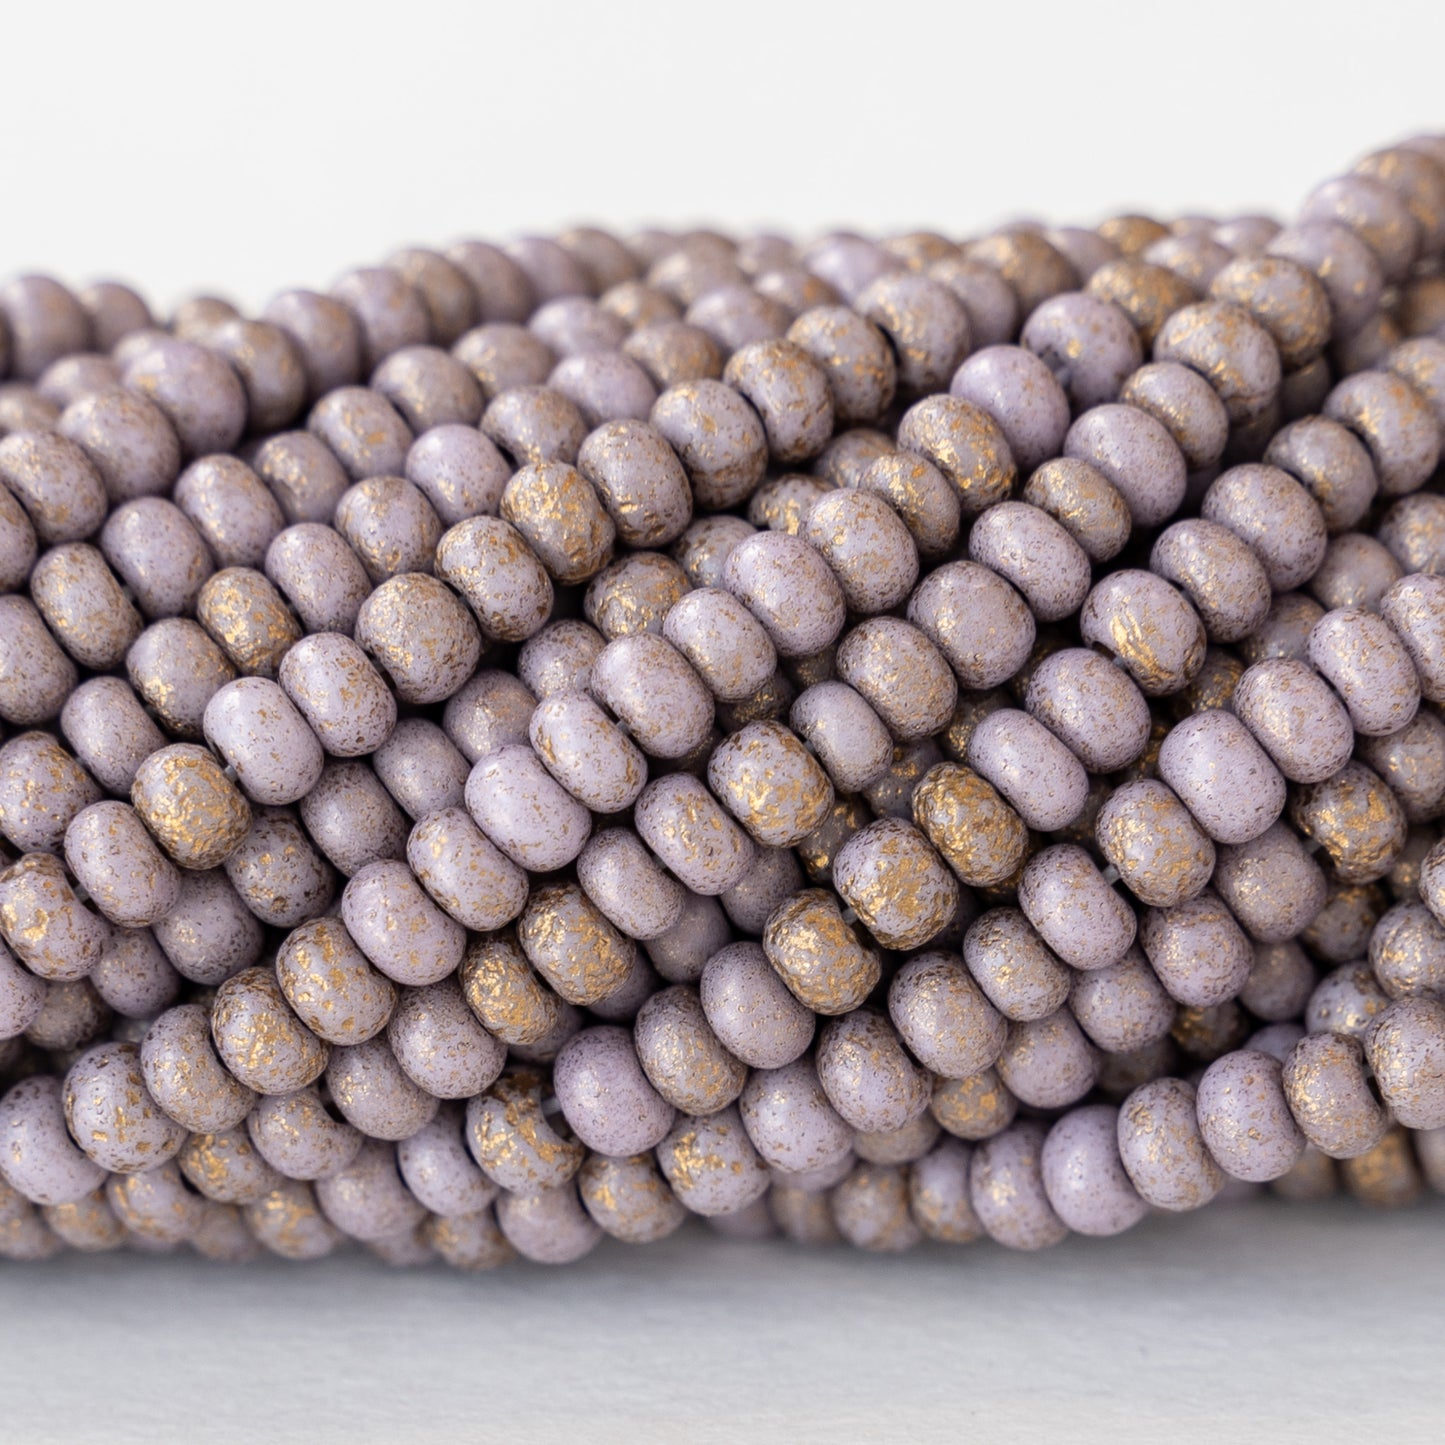 Size 6 Seed Beads - Opaque Purple Mauve with Gold Dust - Choose Amount